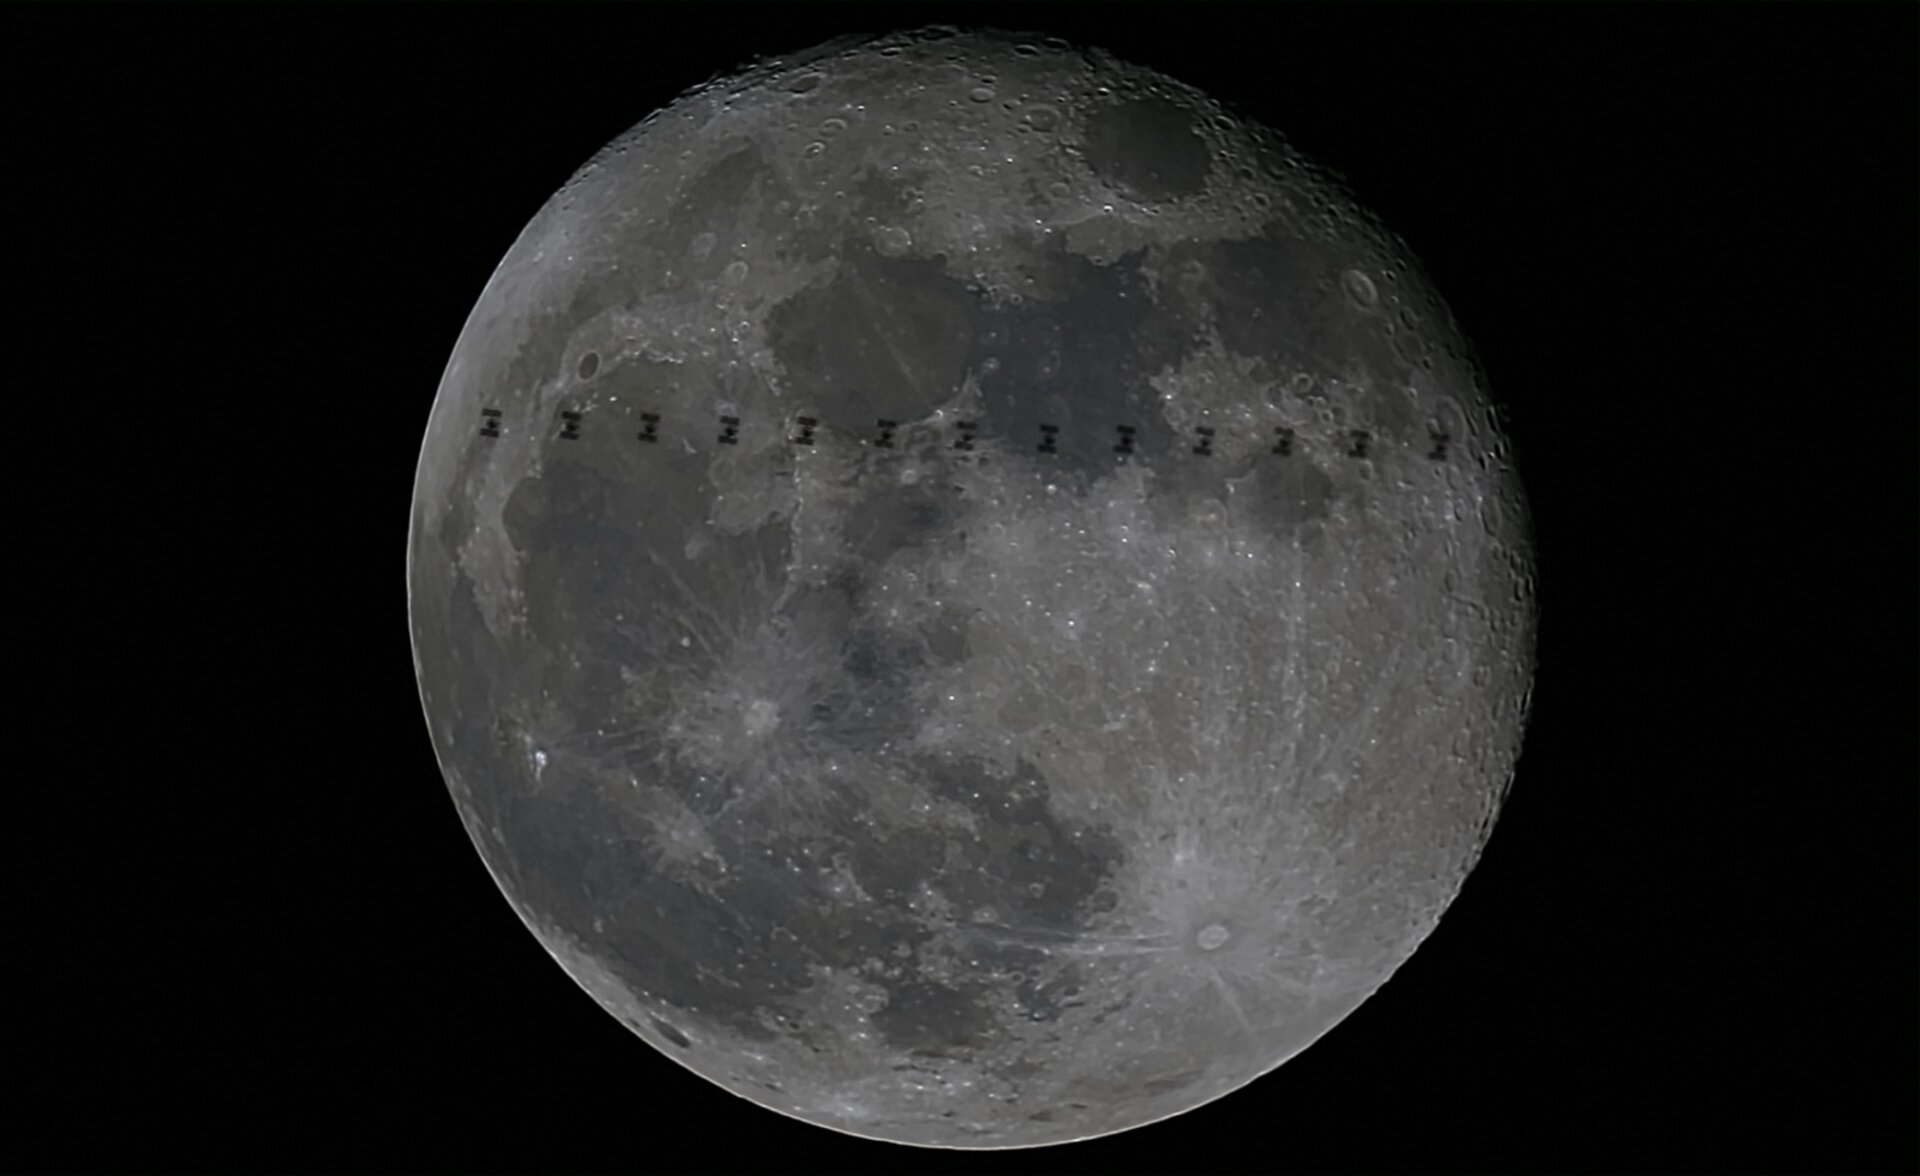 The International Space Station crosses the Moon